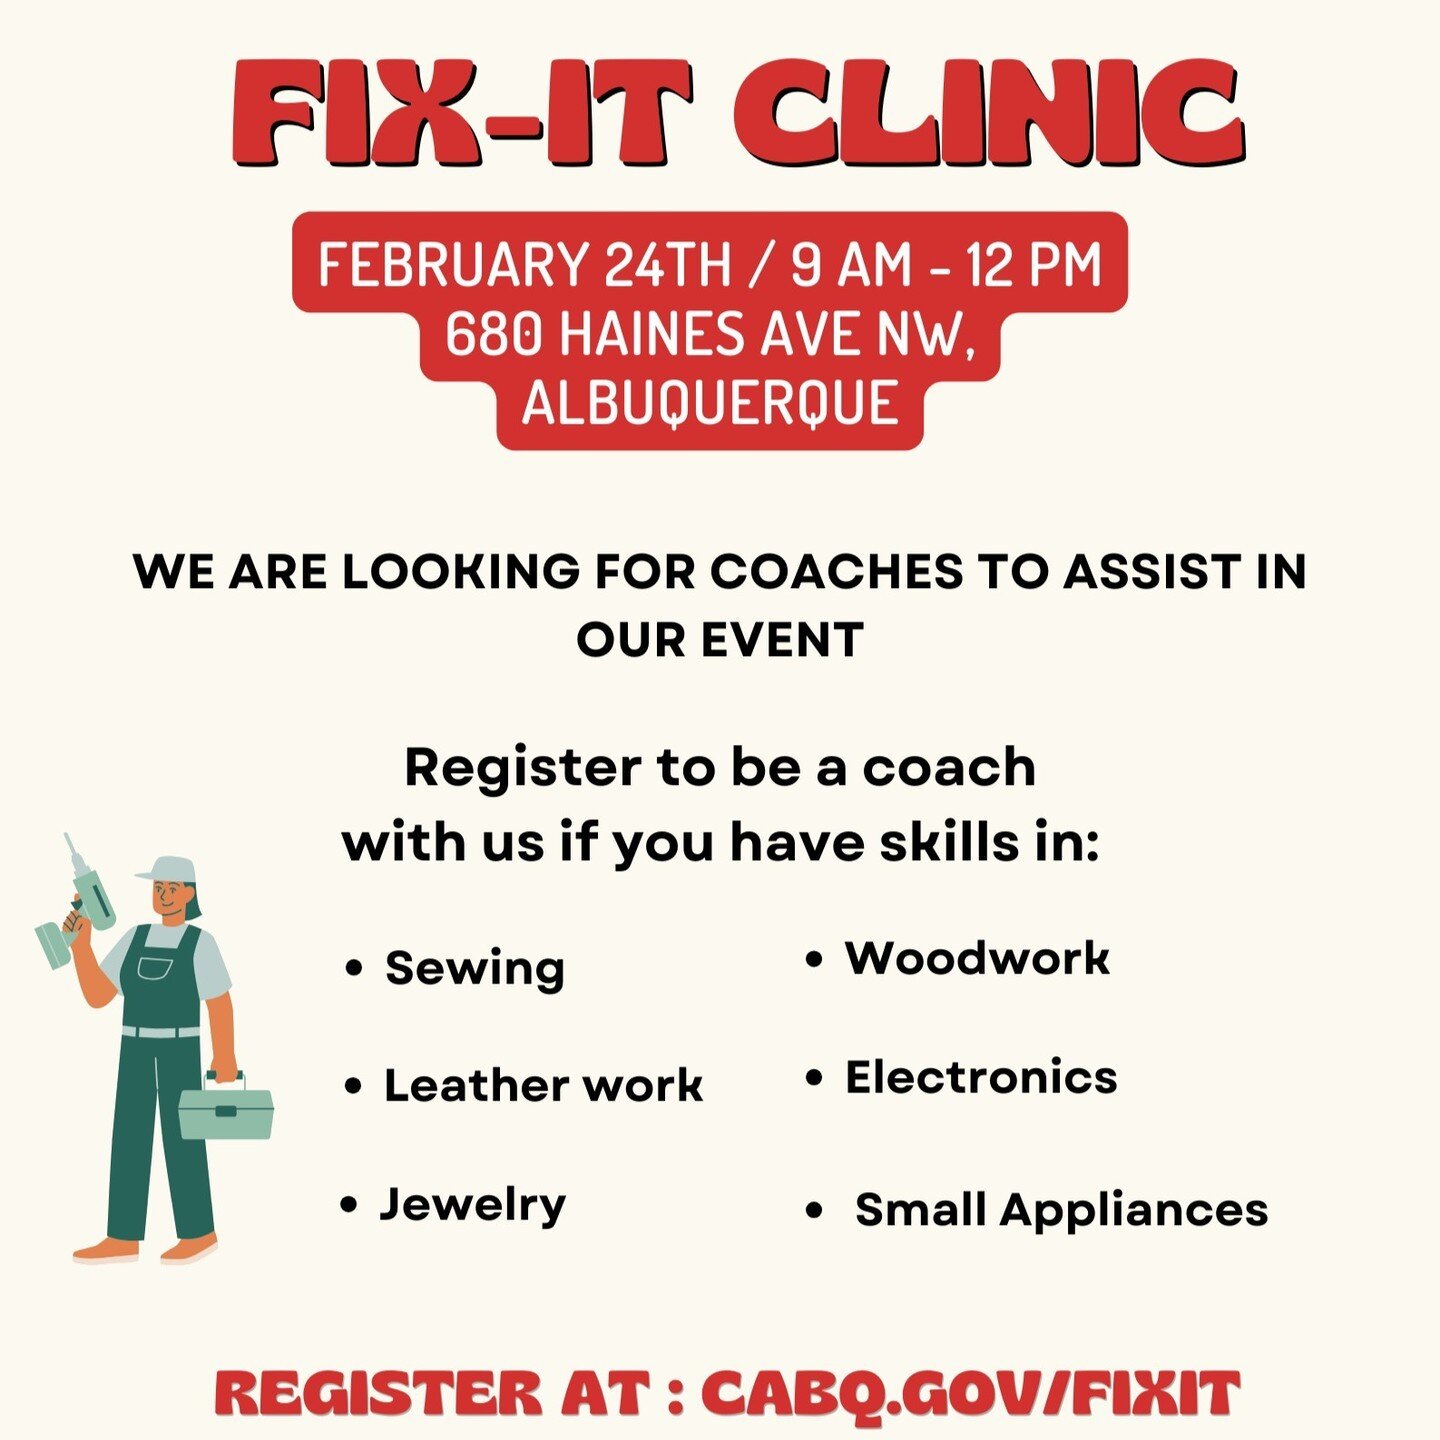 Get your tools ready! We're looking for handy helpers to join us as coaches for our upcoming Fixit Clinic event on 2/24. Join us in making a positive impact on our community by reusing items instead of tossing them out. Click the link in our bio for 